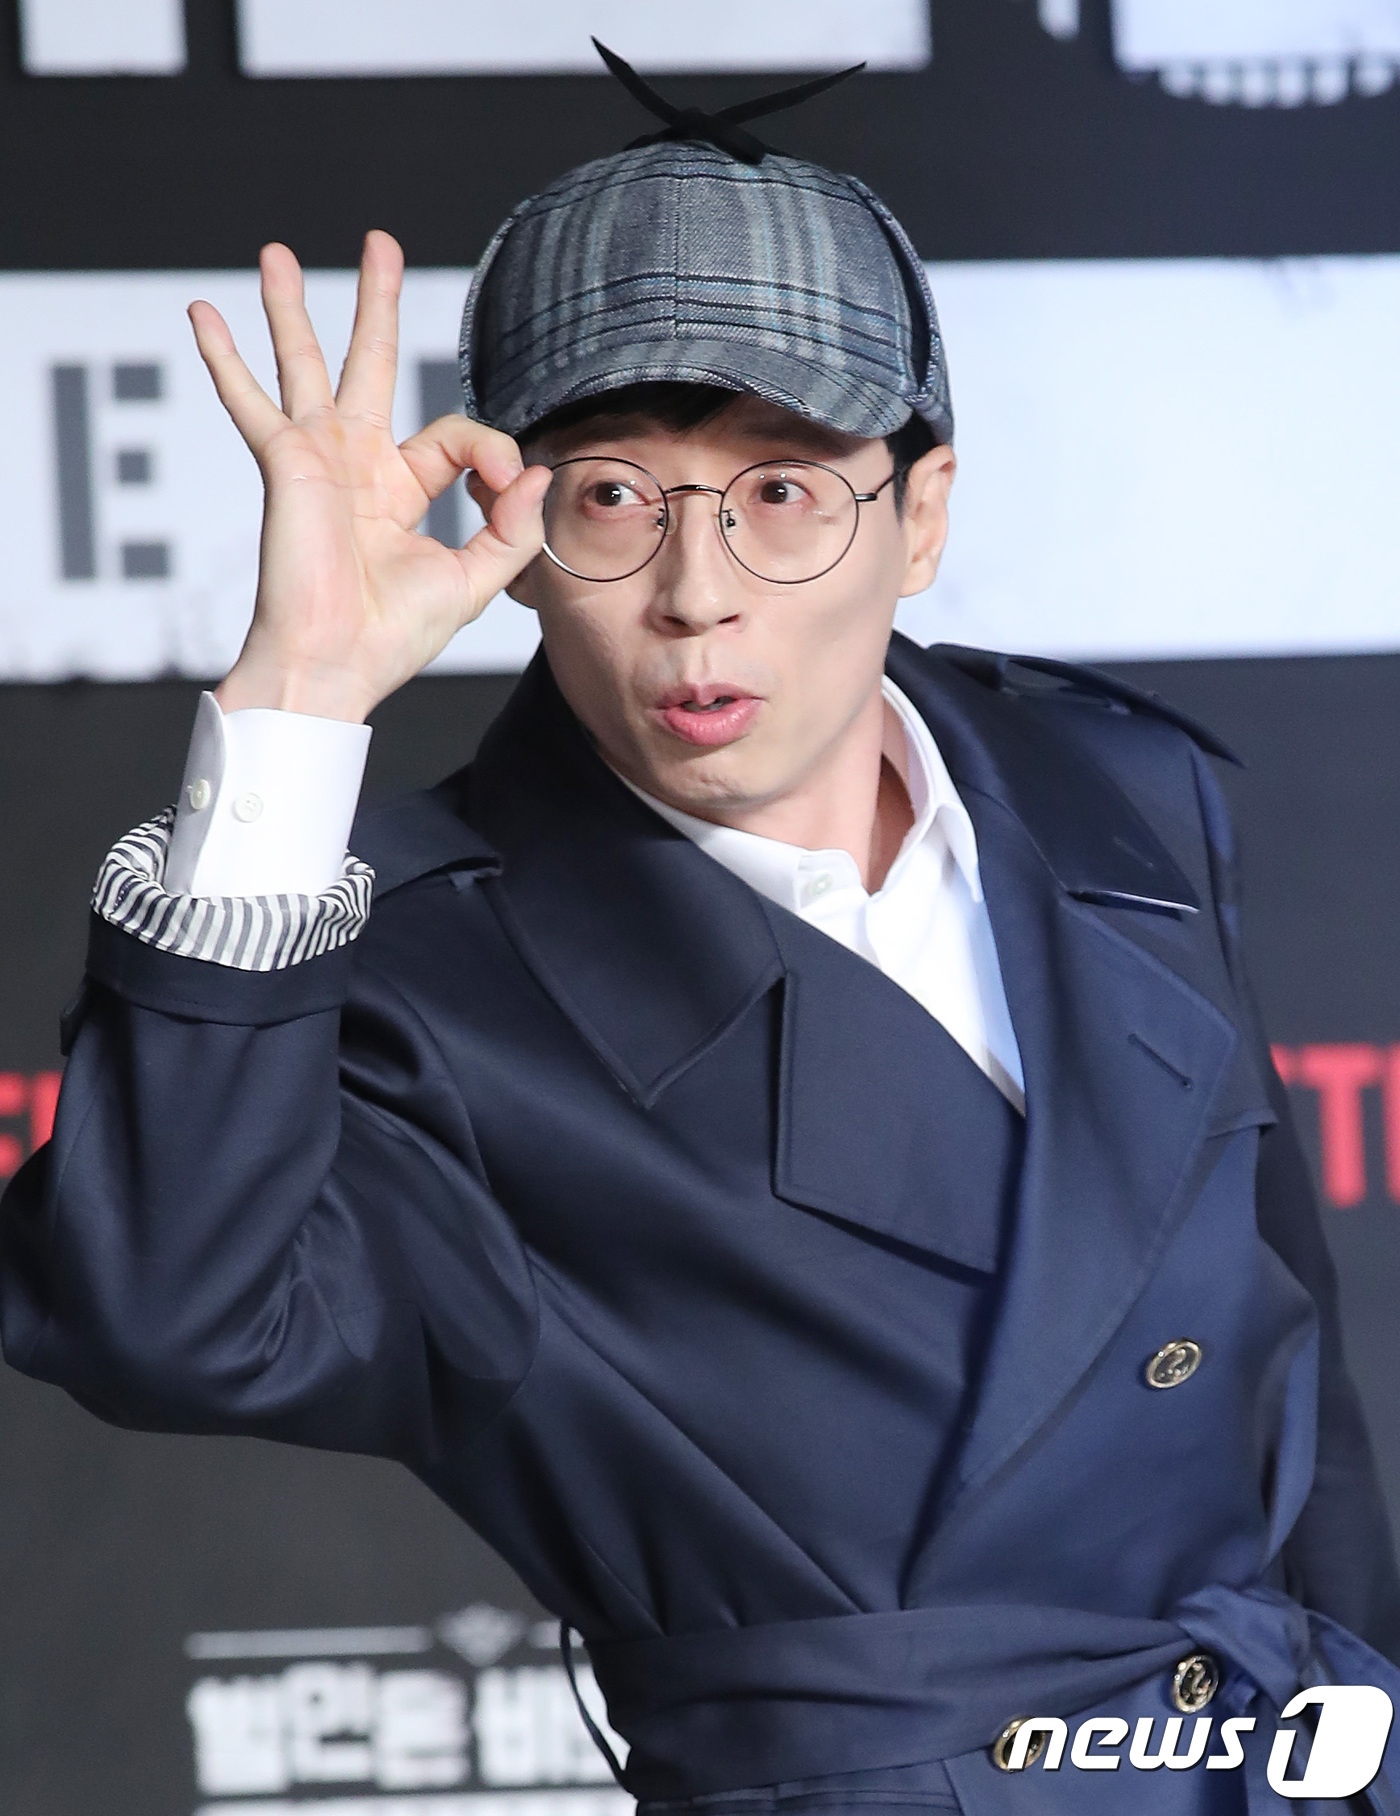 Seoul) = Broadcaster Yoo Jae-Suk meets viewers with SBSs new Pilot entertainment program.SBS said on the 18th, Yoo Jae-Suk, who has been playing the central role of Running Man for the eighth year, will once again coincide with PD Jung Chul-min, who led Running Man.I recently planned the program while having a break, said Jung Chul-min, a PD. I asked Yoo Jae-Suk to join me and I responded happily.Yoo Jae-Suks SBS new Pilot entertainment program is being discussed and organized.